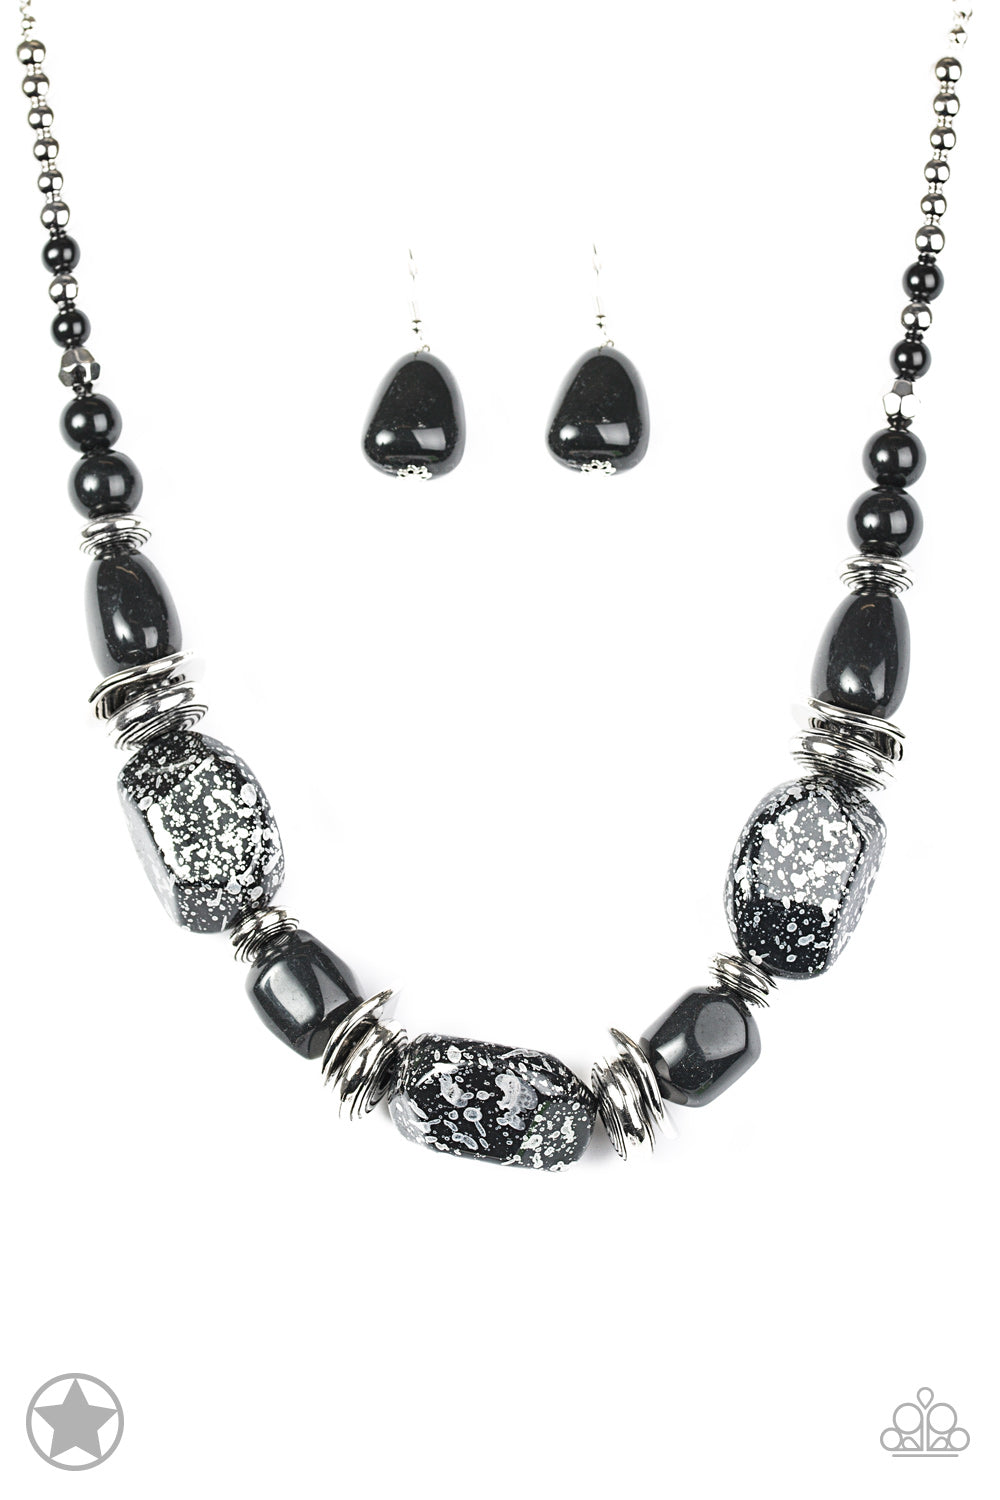 In Good Glazes - Black - Bling With Crystal